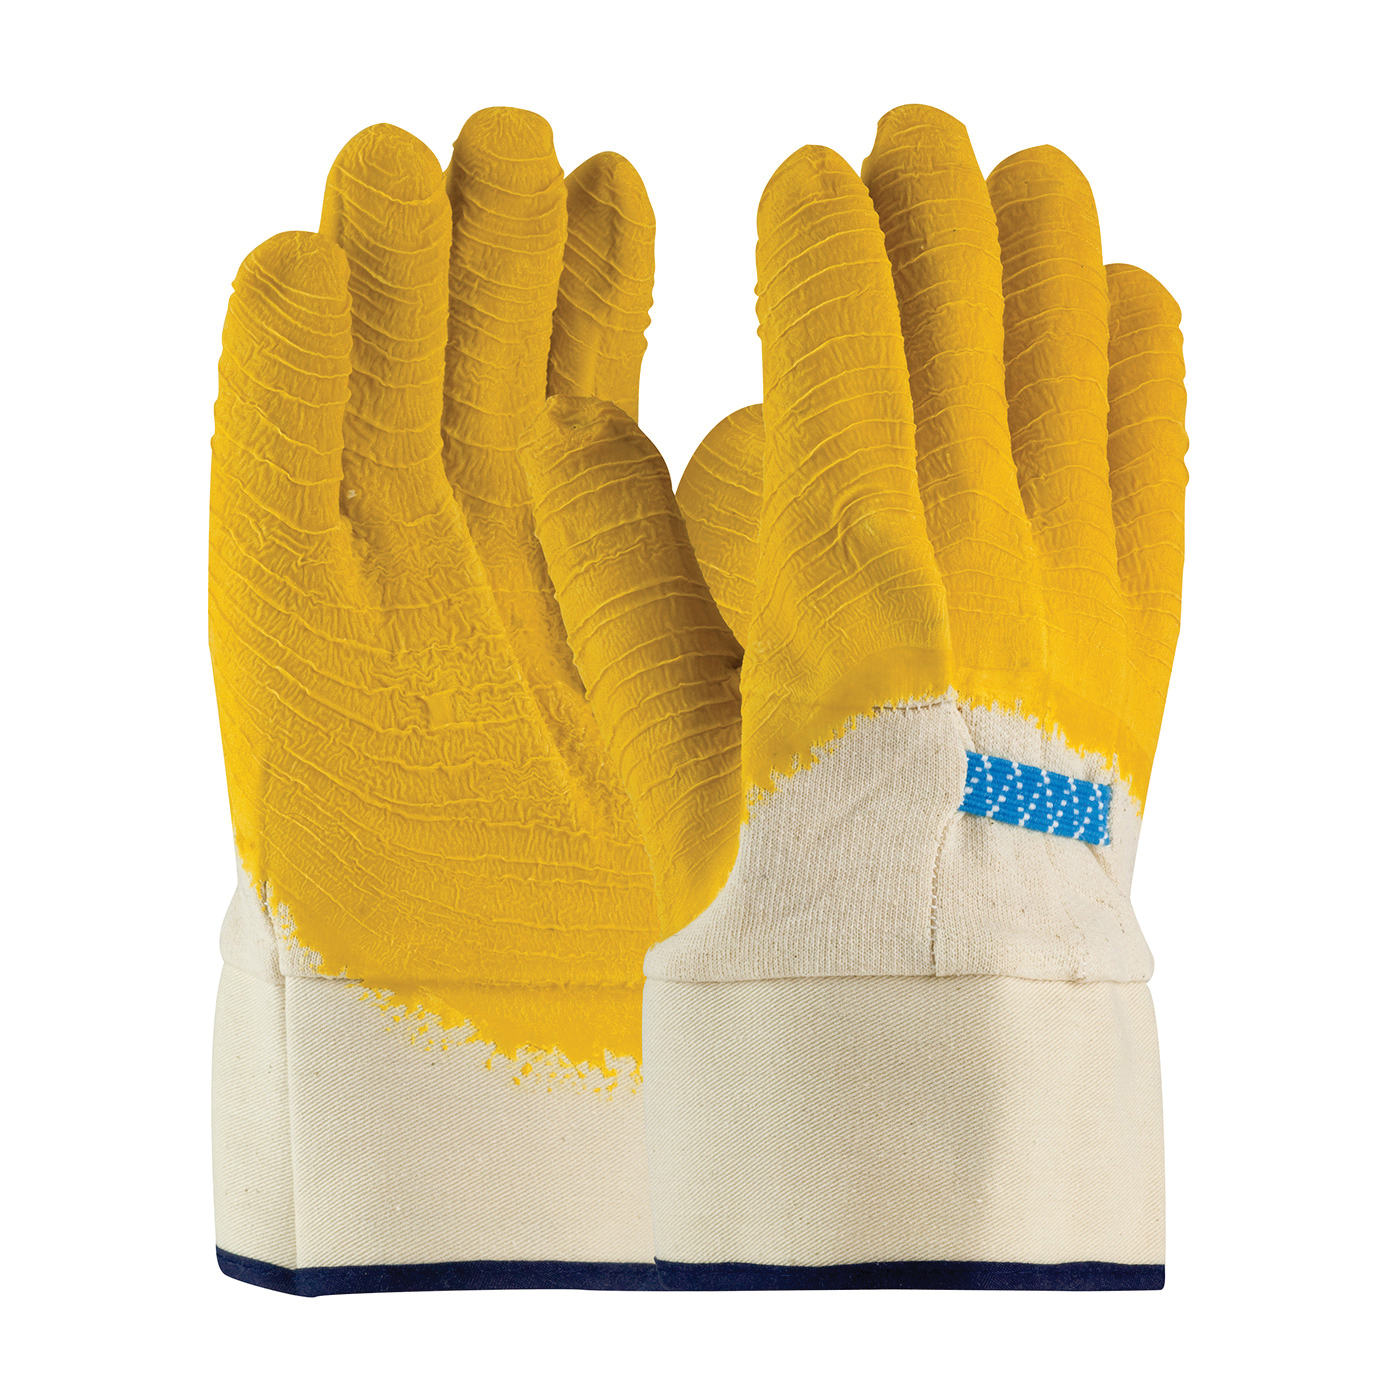 PIP® Armor® 55-3273 Men's General Purpose Gloves, Fabric/Work, Clute Cut/Straight Thumb Style, L, Cotton/Natural Rubber Latex Palm, Cotton/Natural Rubber Latex, White/Yellow, Plasticized Safety Cuff, Latex Coating, Resists: Abrasion, Cut, Puncture and Tear